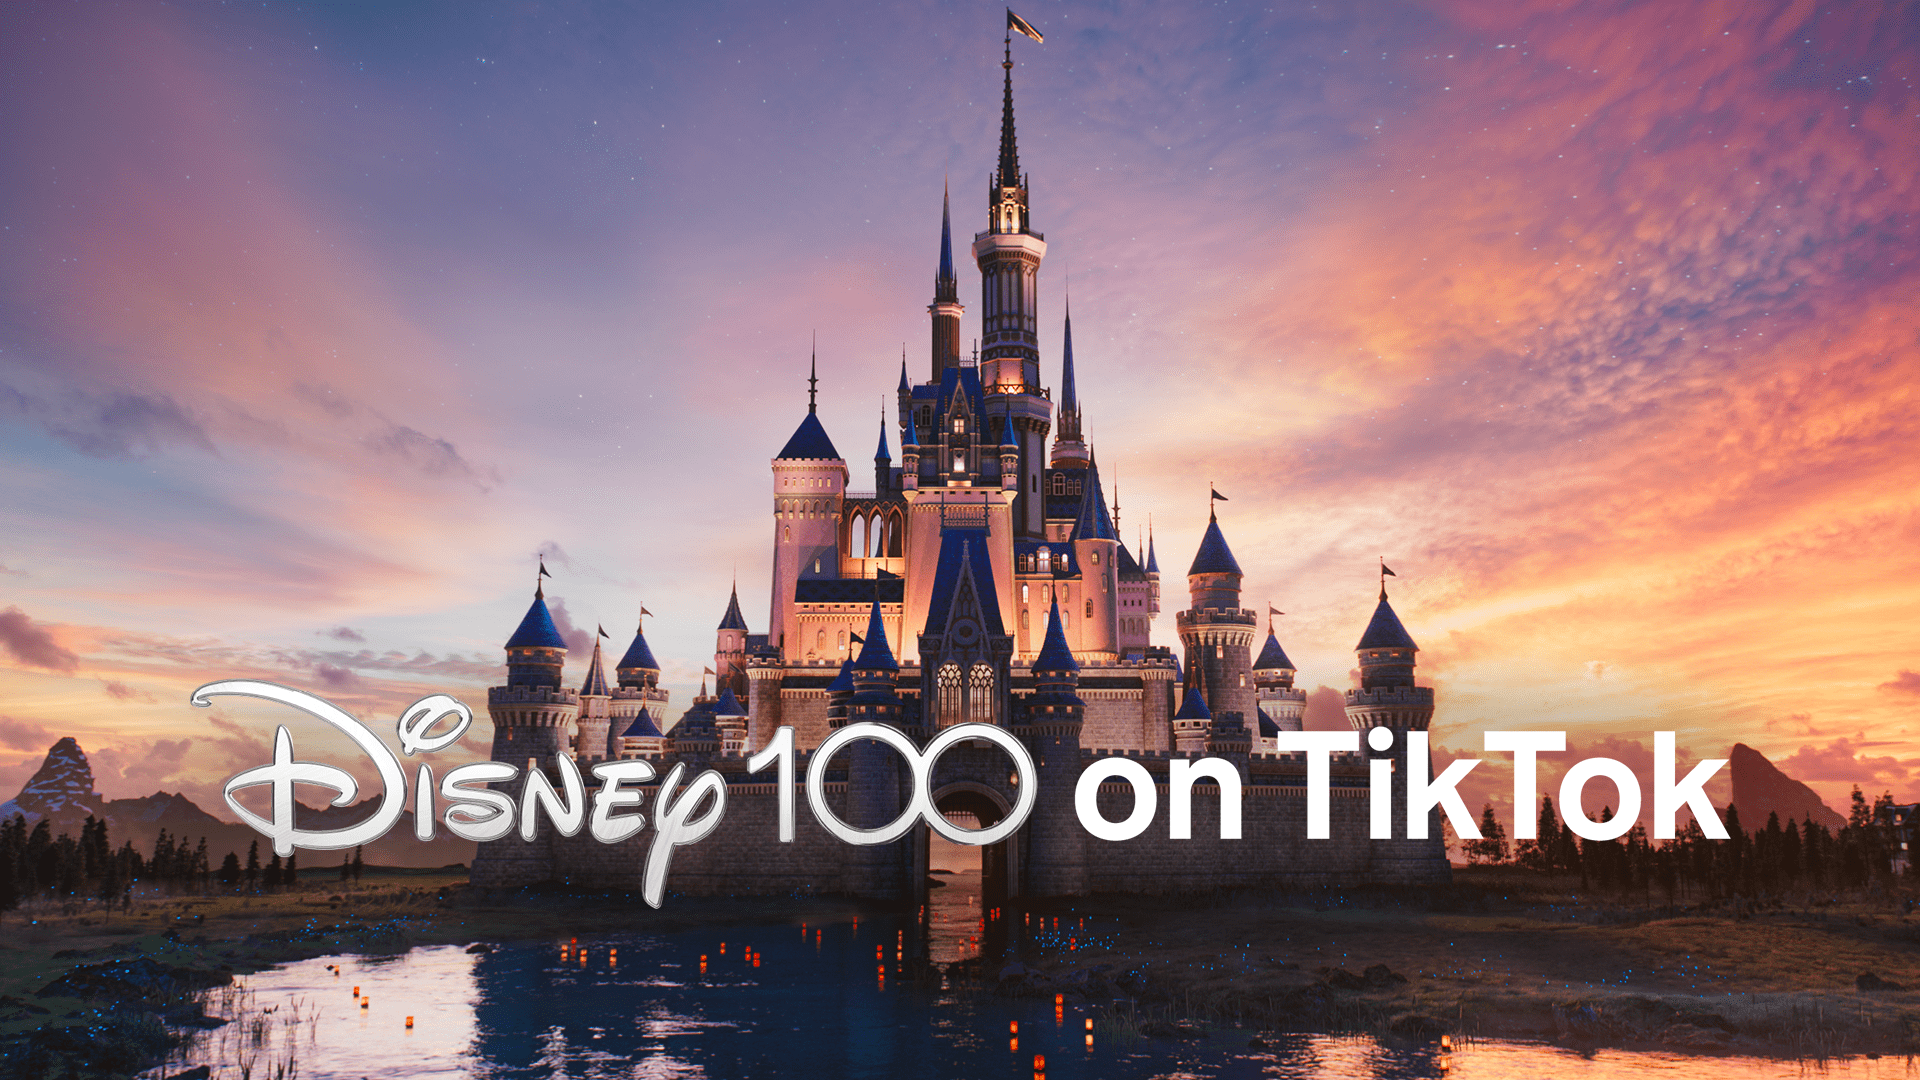 Disney bring their magic to TikTok with lots for users to discover